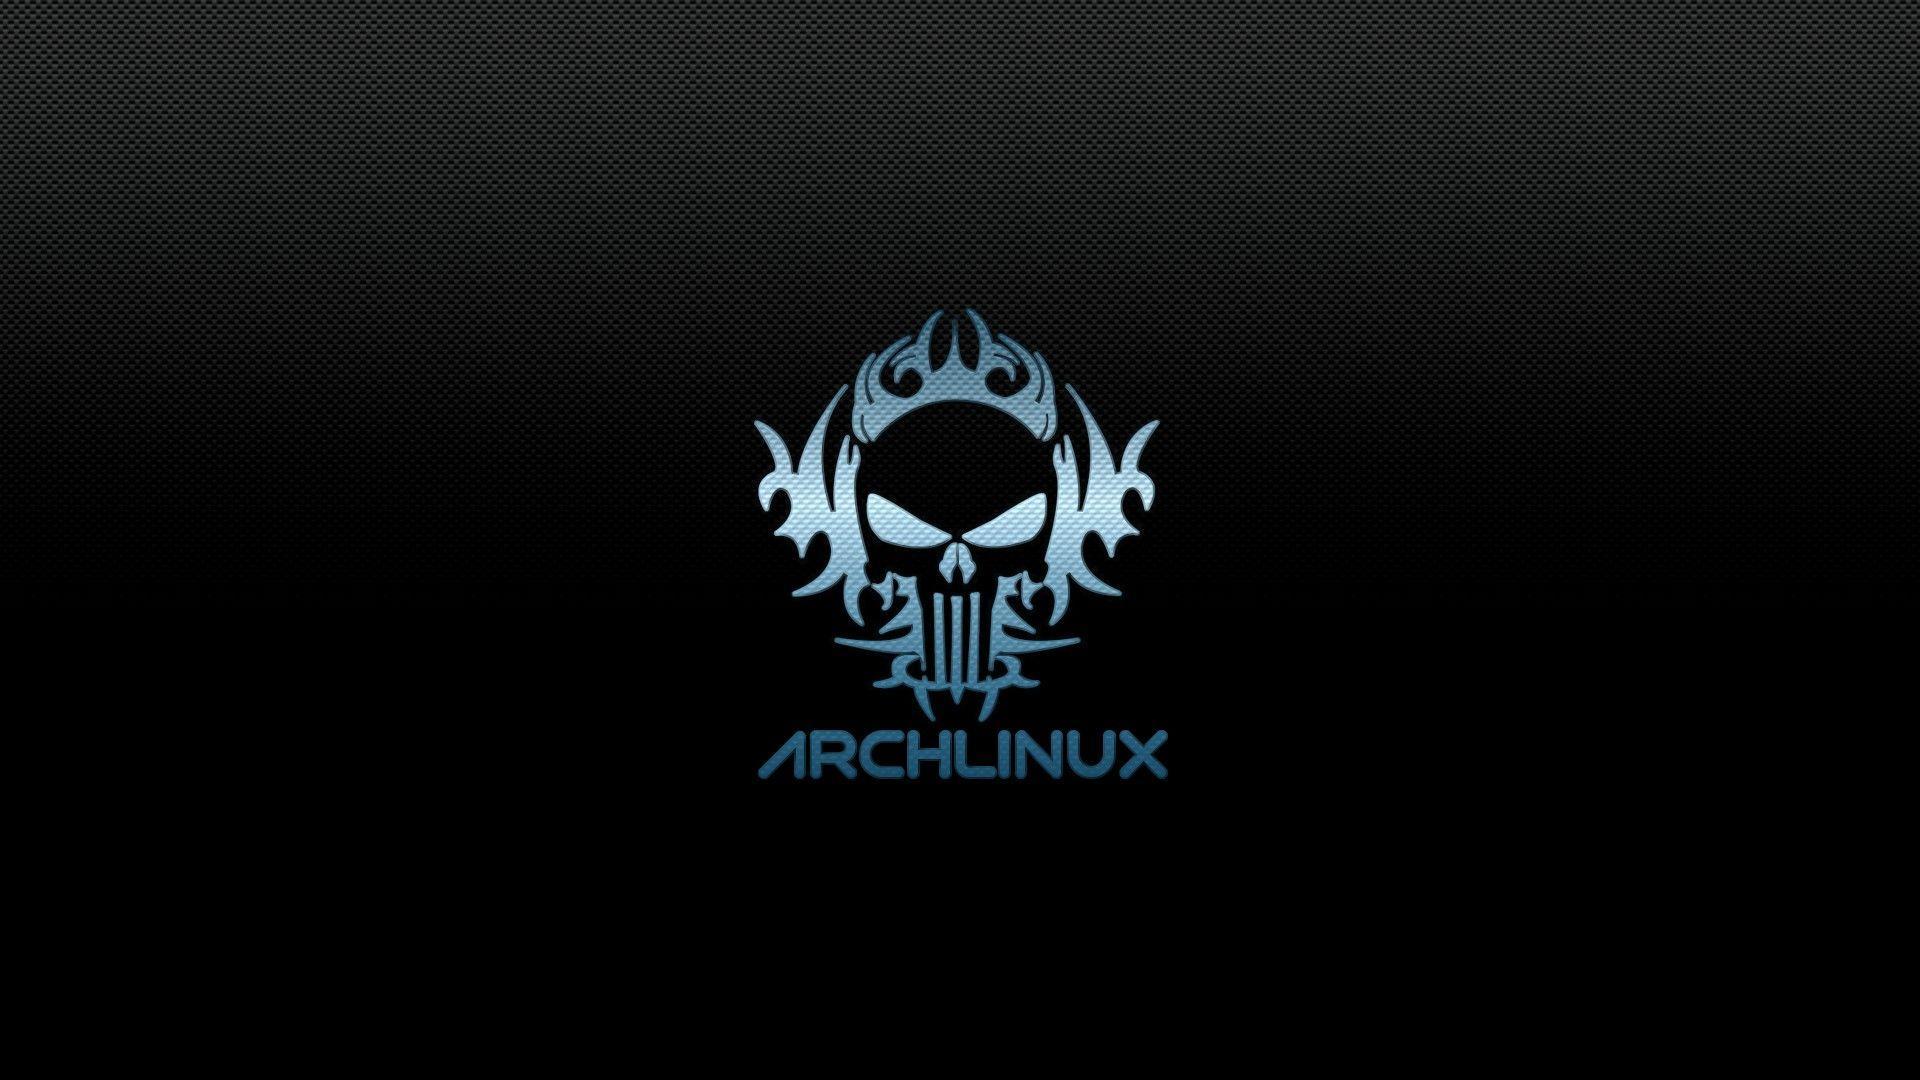 Arch Linux Wallpaper. Arch Linux Background. Arch Linux